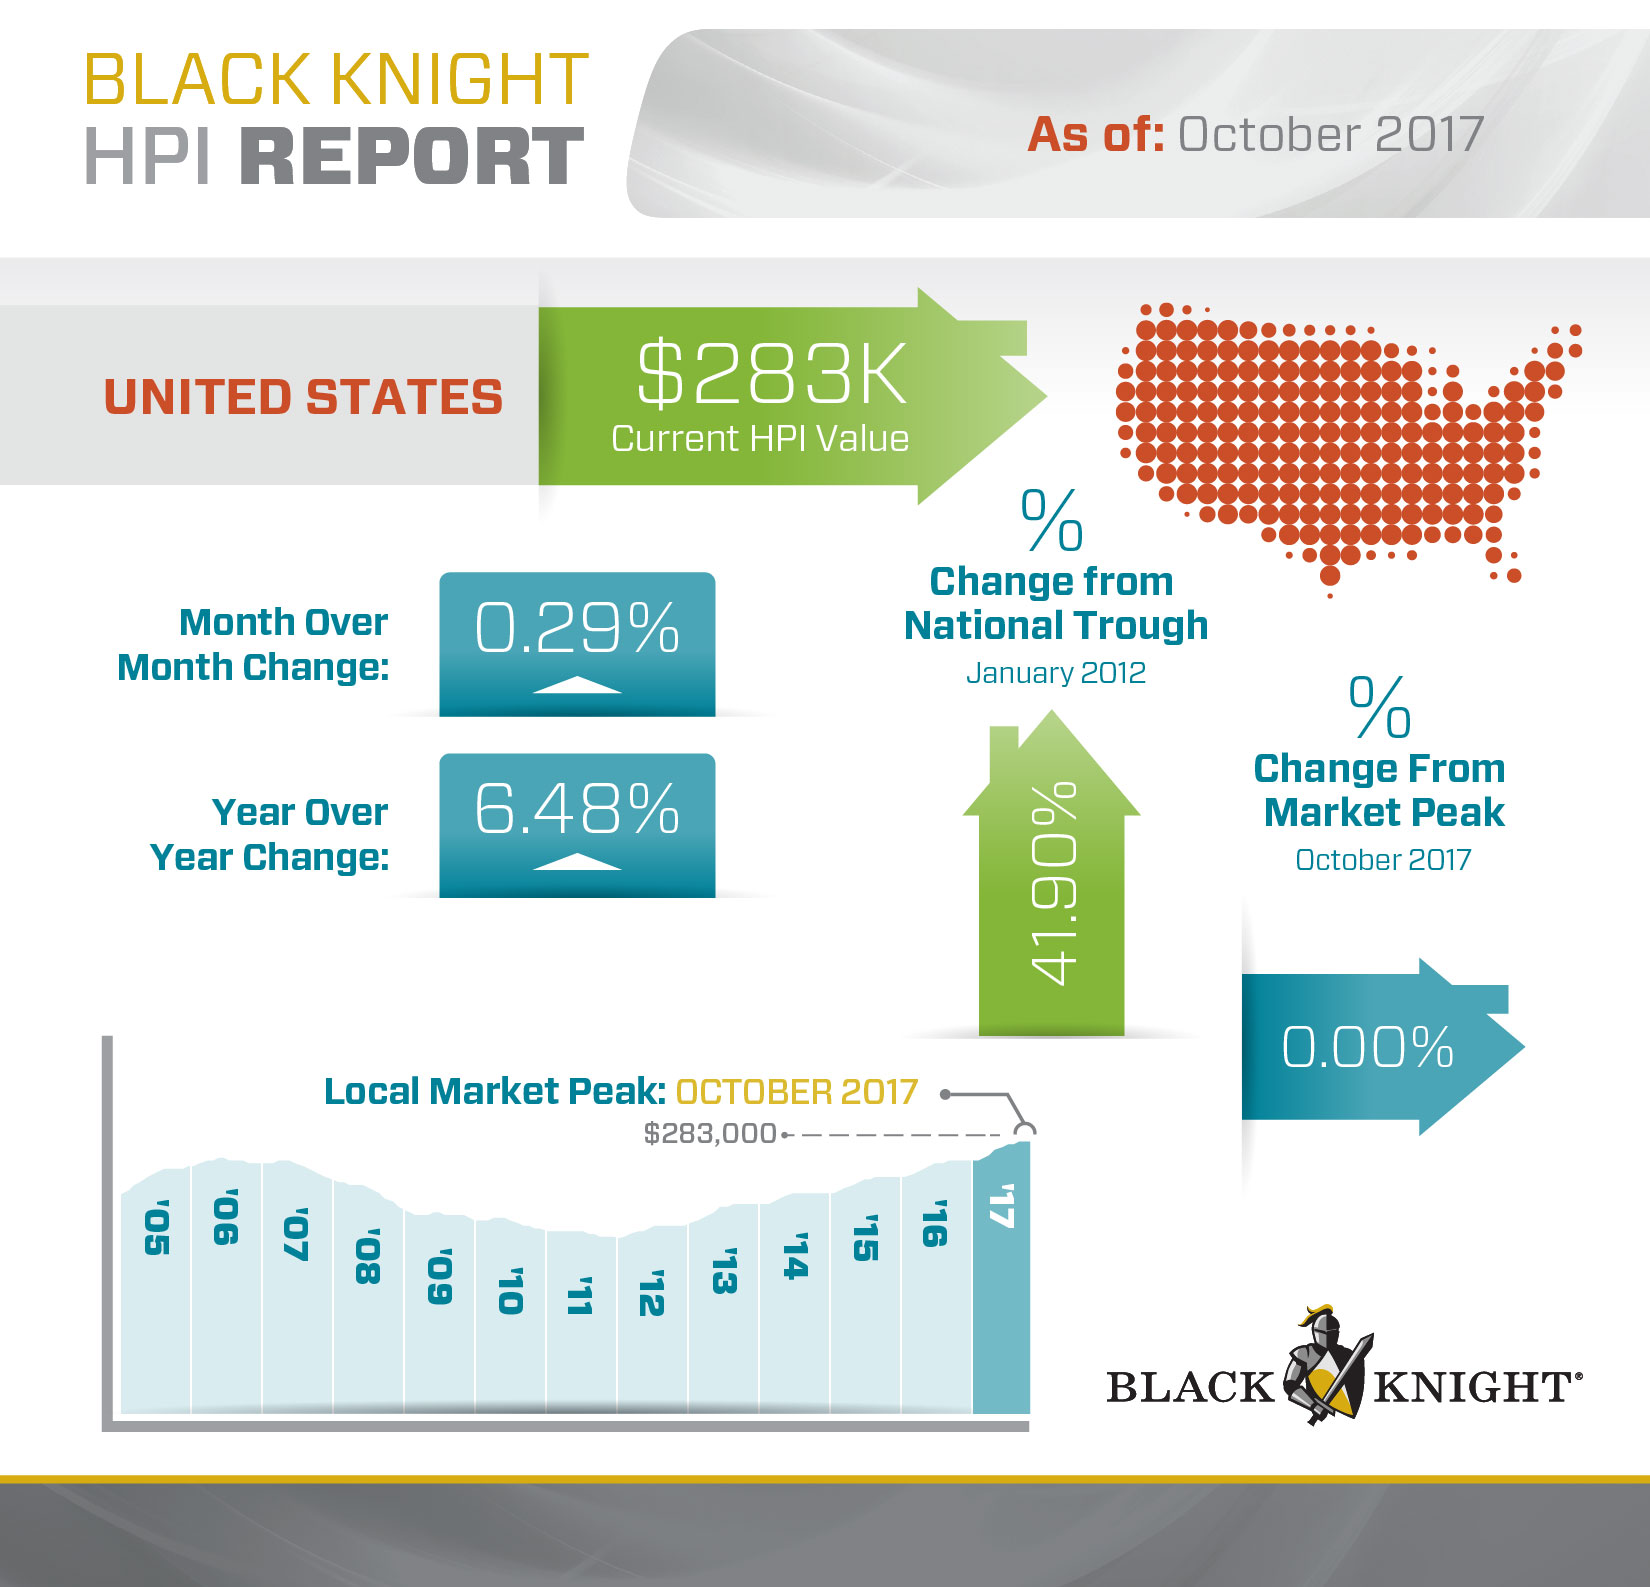 During October, Black Knight’s Home Price Index reached a new peak at $283,000